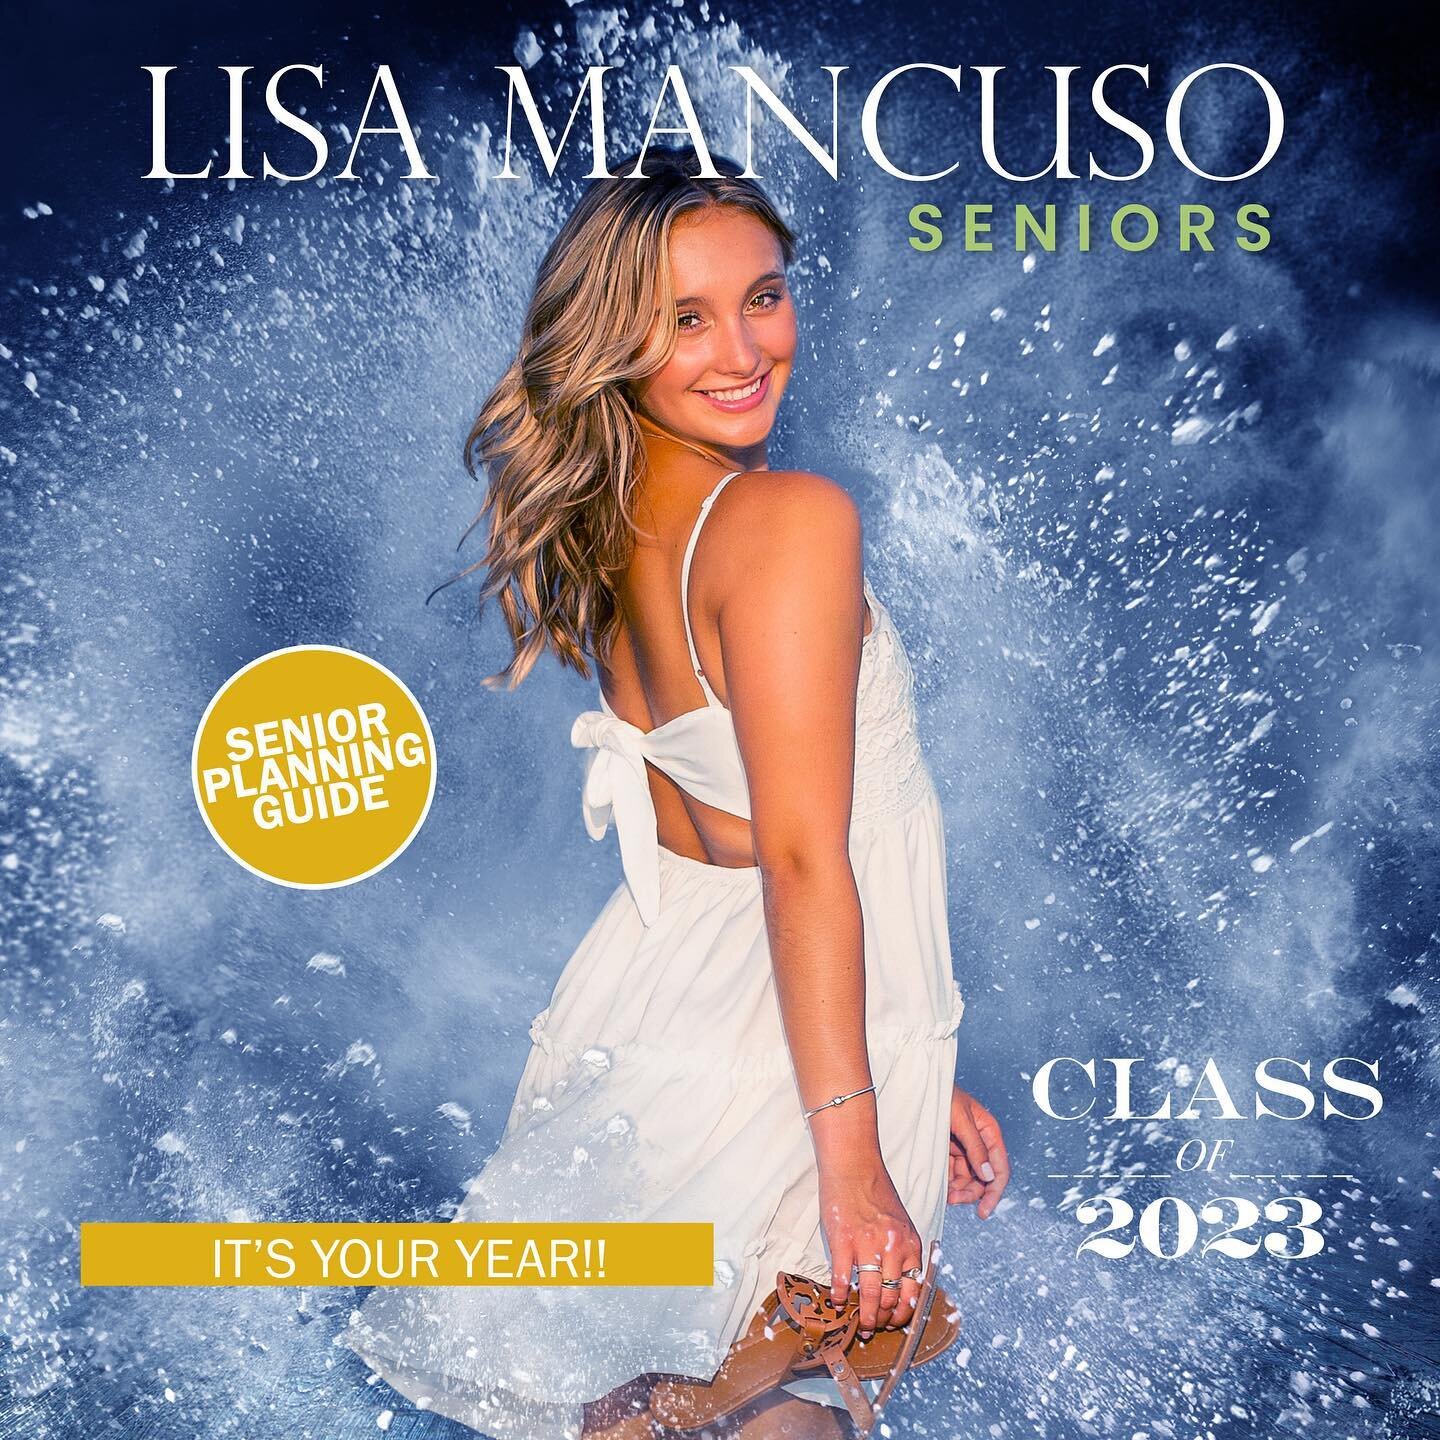 2023 Seniors, now is the time to@book your Senior photo session! August is already booking up quickly! Call/text 617-901-4966, email lisa@mancusophoto.com or send me a message here!! #seniorphotographer #maseniorphotographer #seniors #seniors2023